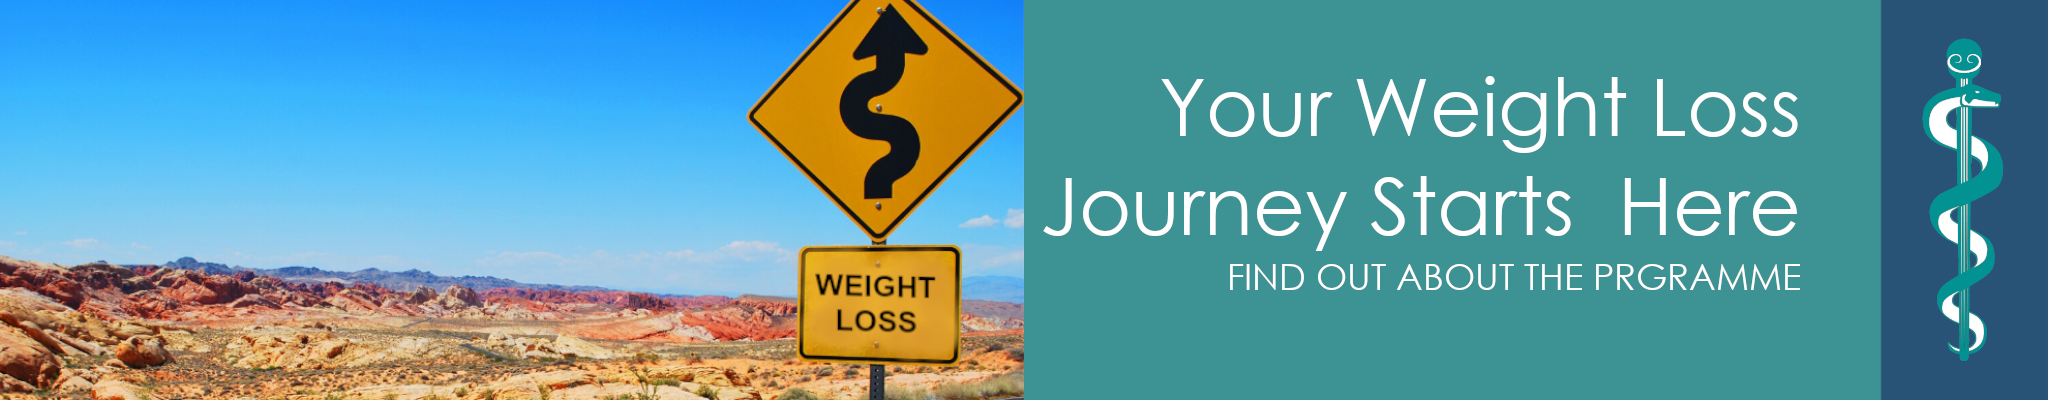 Your Weight Loss Journey Starts Here - National Medical Weight Loss Programme at TK Aesthetics